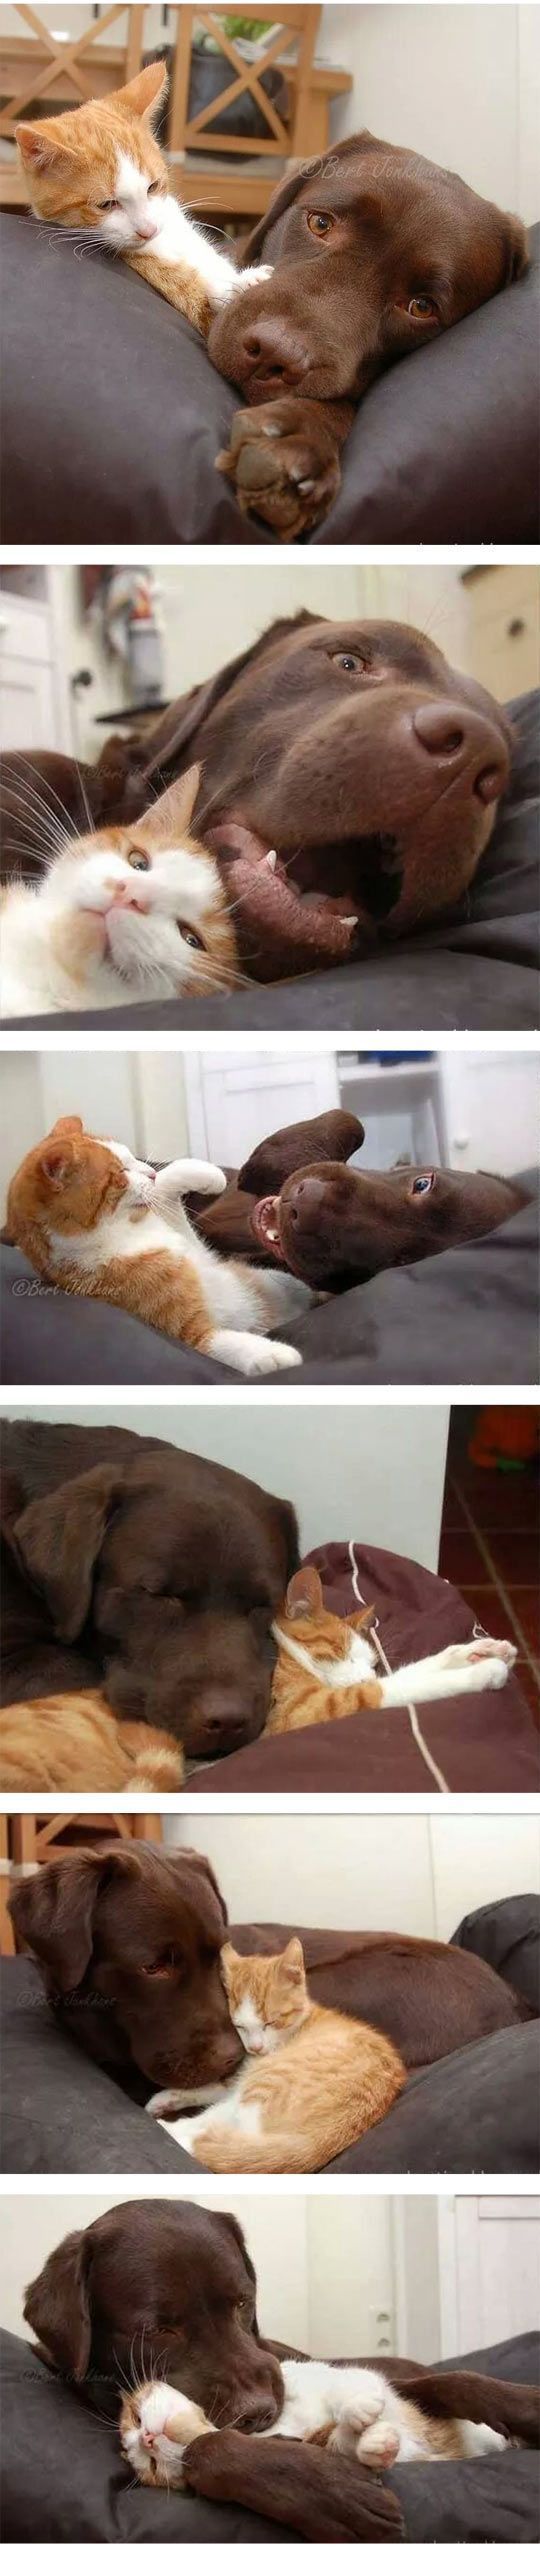 You Can See The Love With These Animals animals cat dog animal cute animals animal pictures animal photos